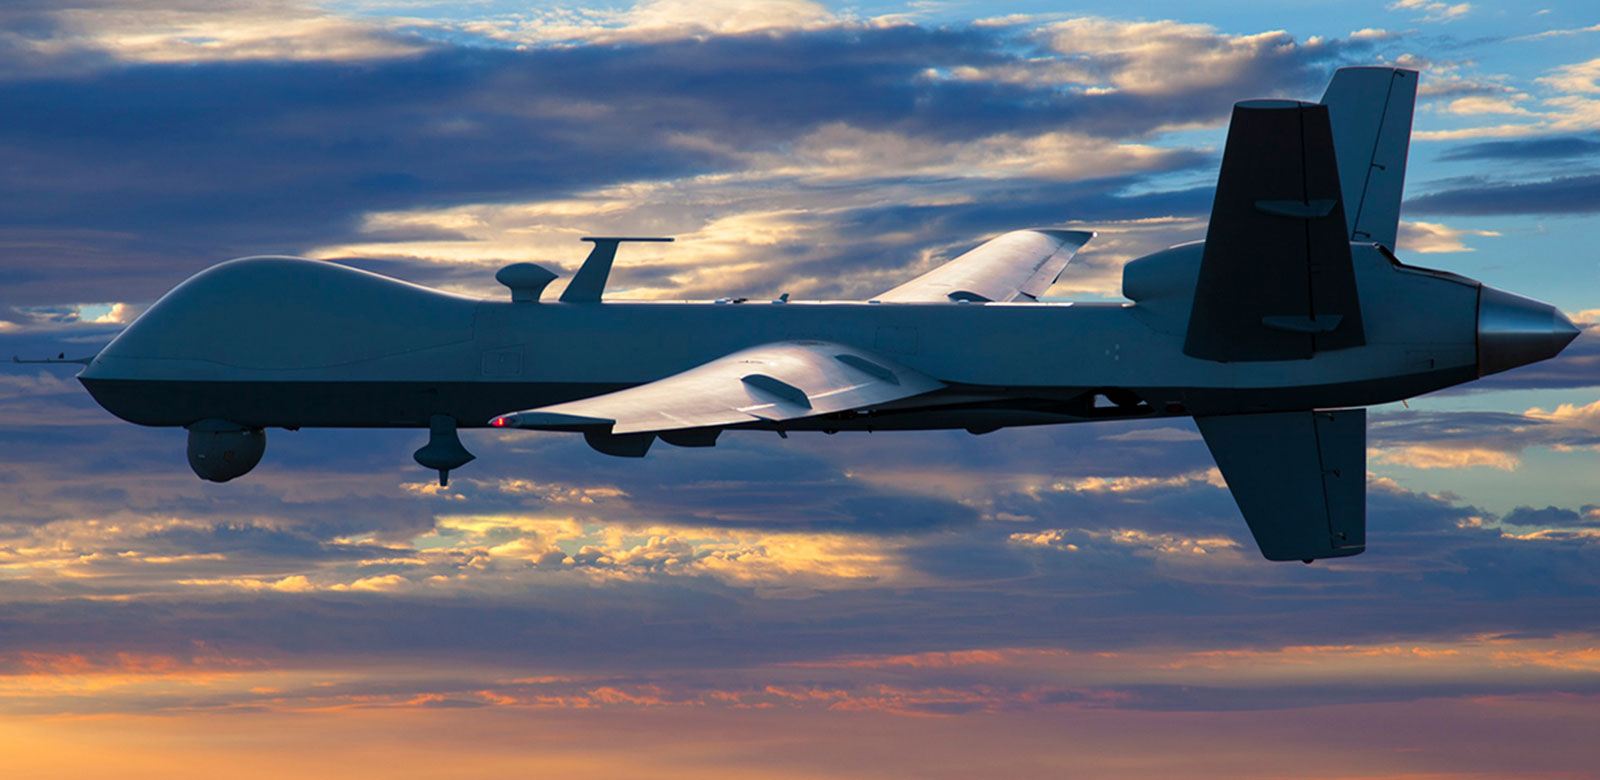 All Block 1-level MQ-9 Reaper drones could be decommissioned in 2024